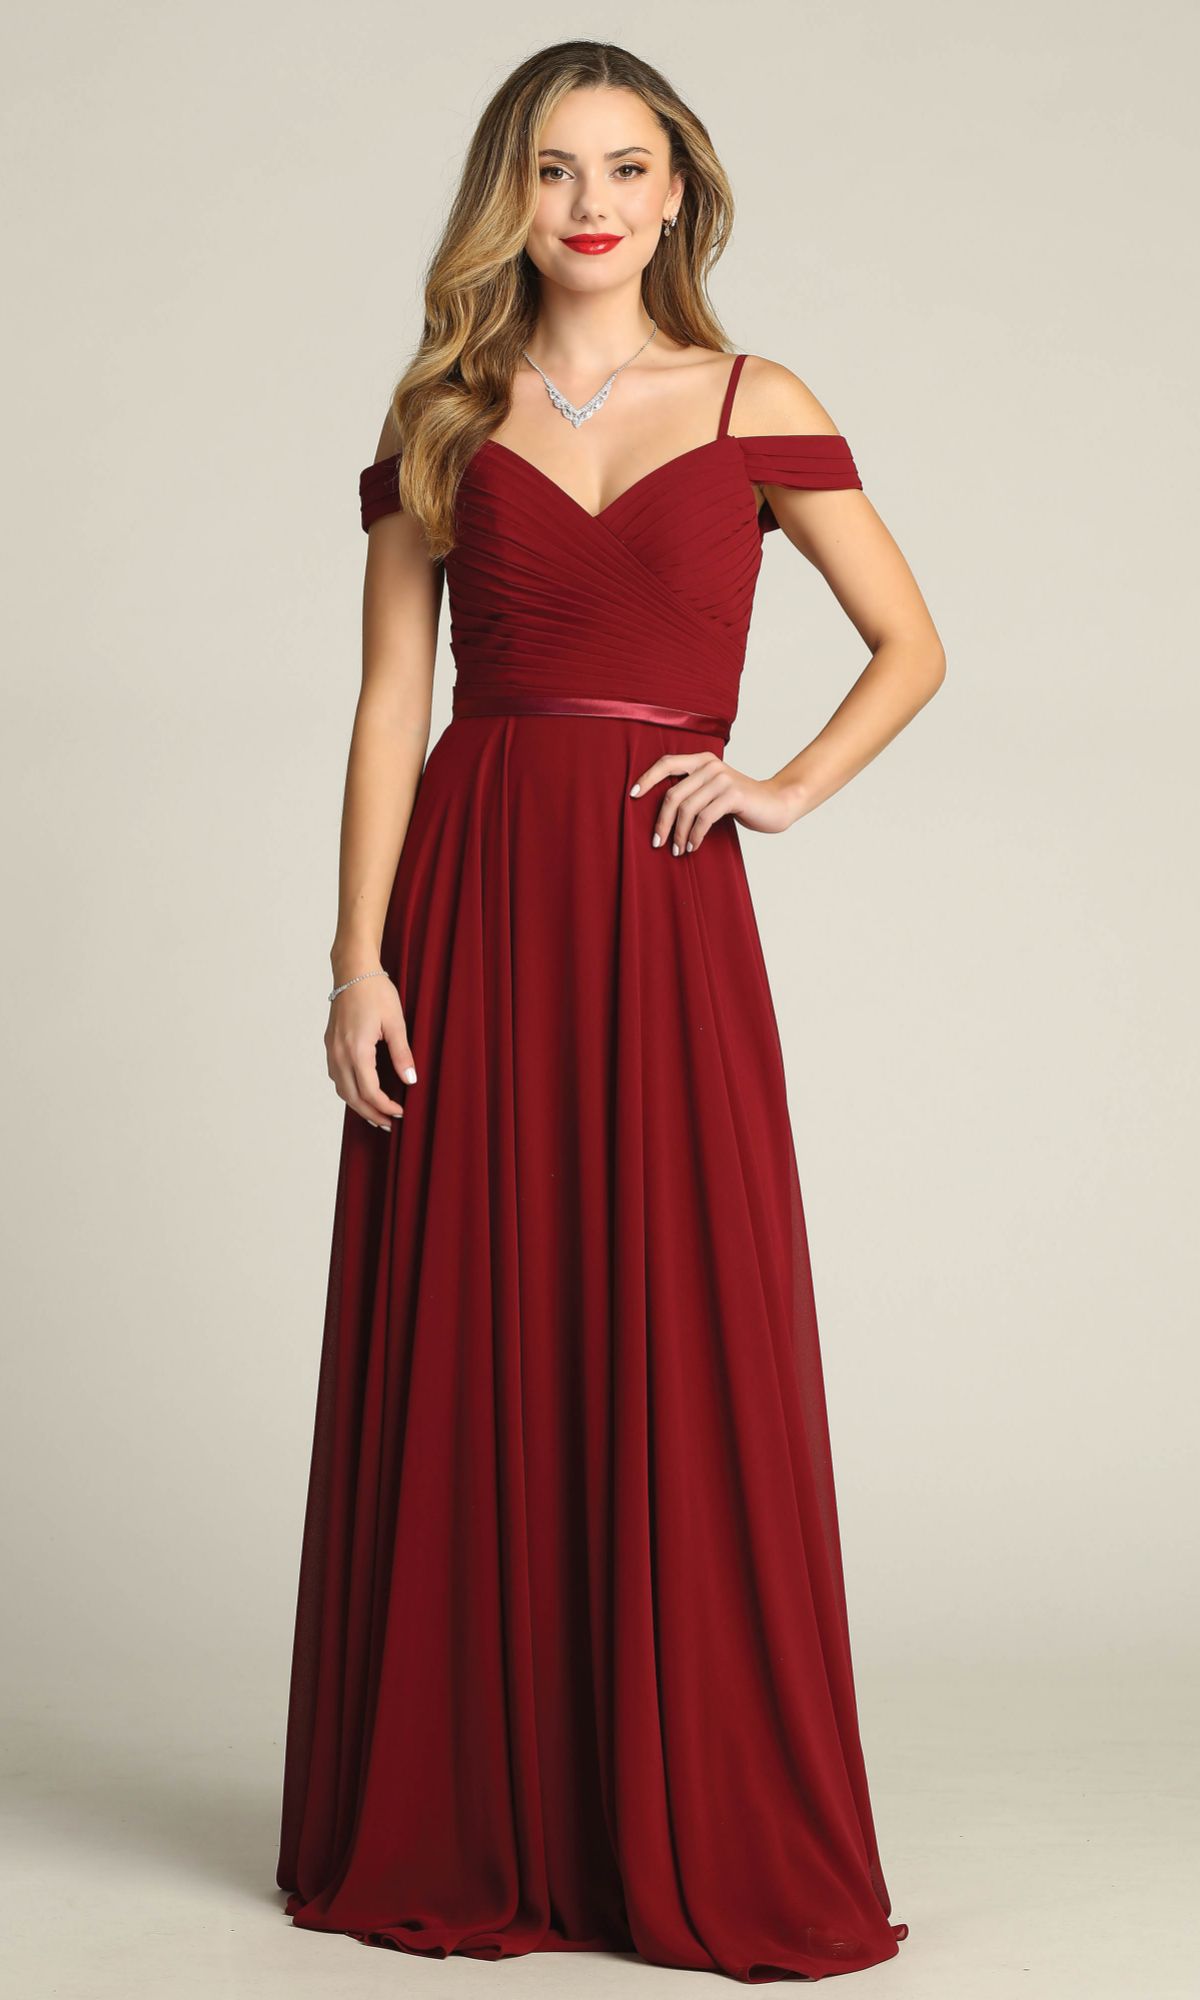 Long Prom Dress C8997 by Chicas